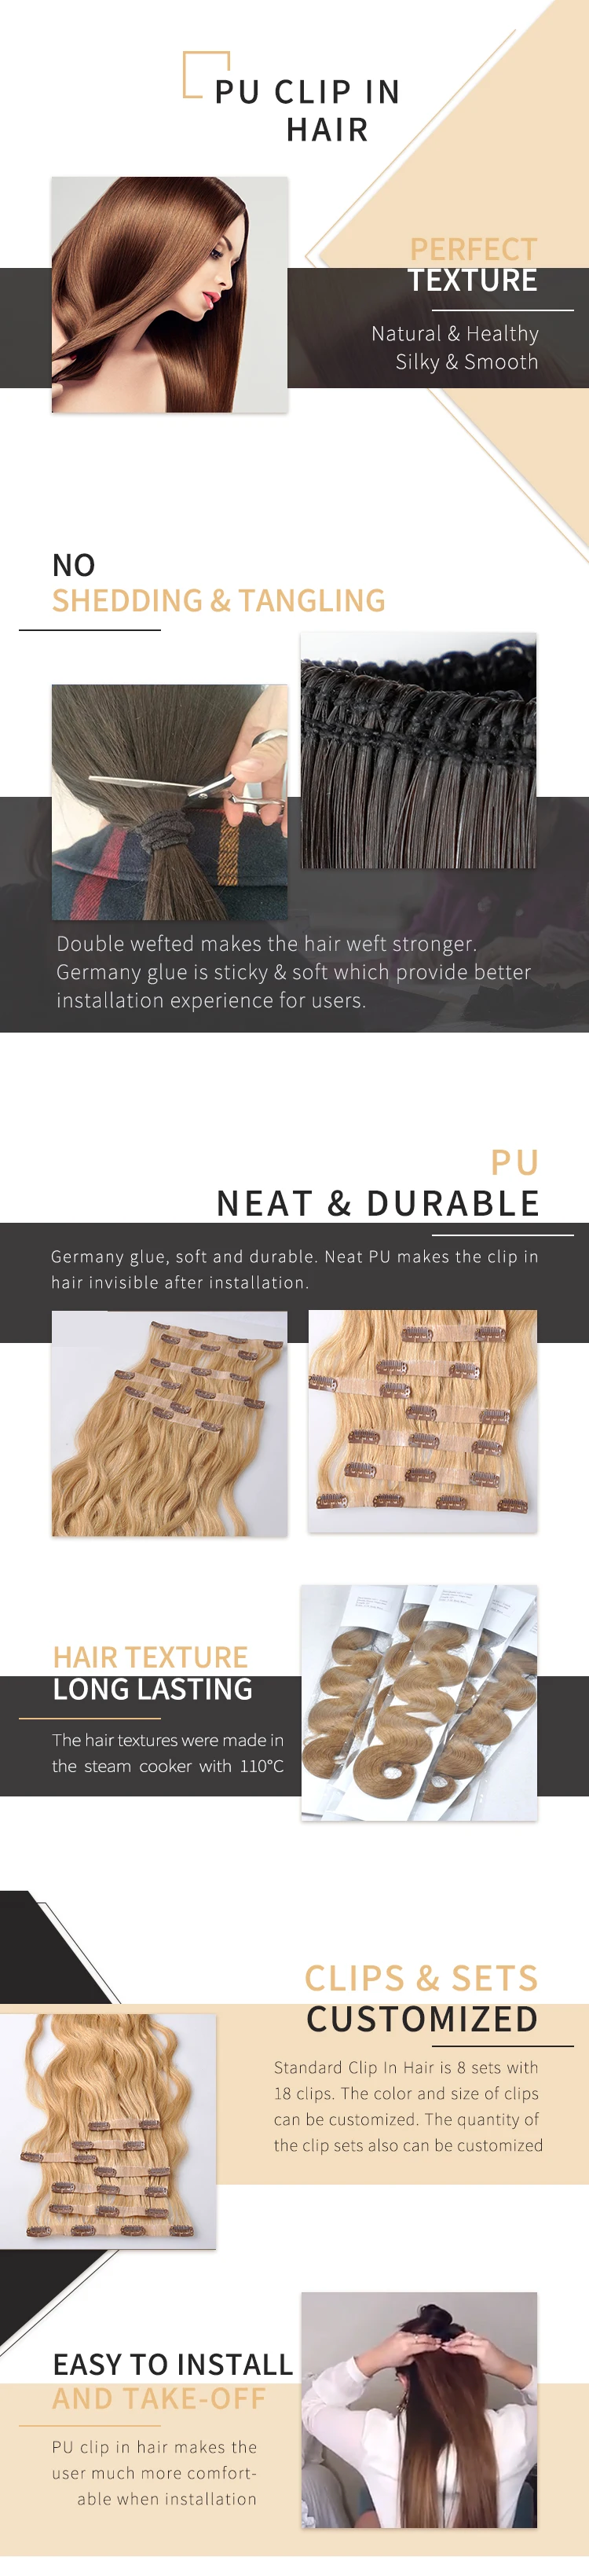 Best Quality Tangle Free Shedding Free European 613 Blonde 100% Human Remy PU Clip Hair Extension